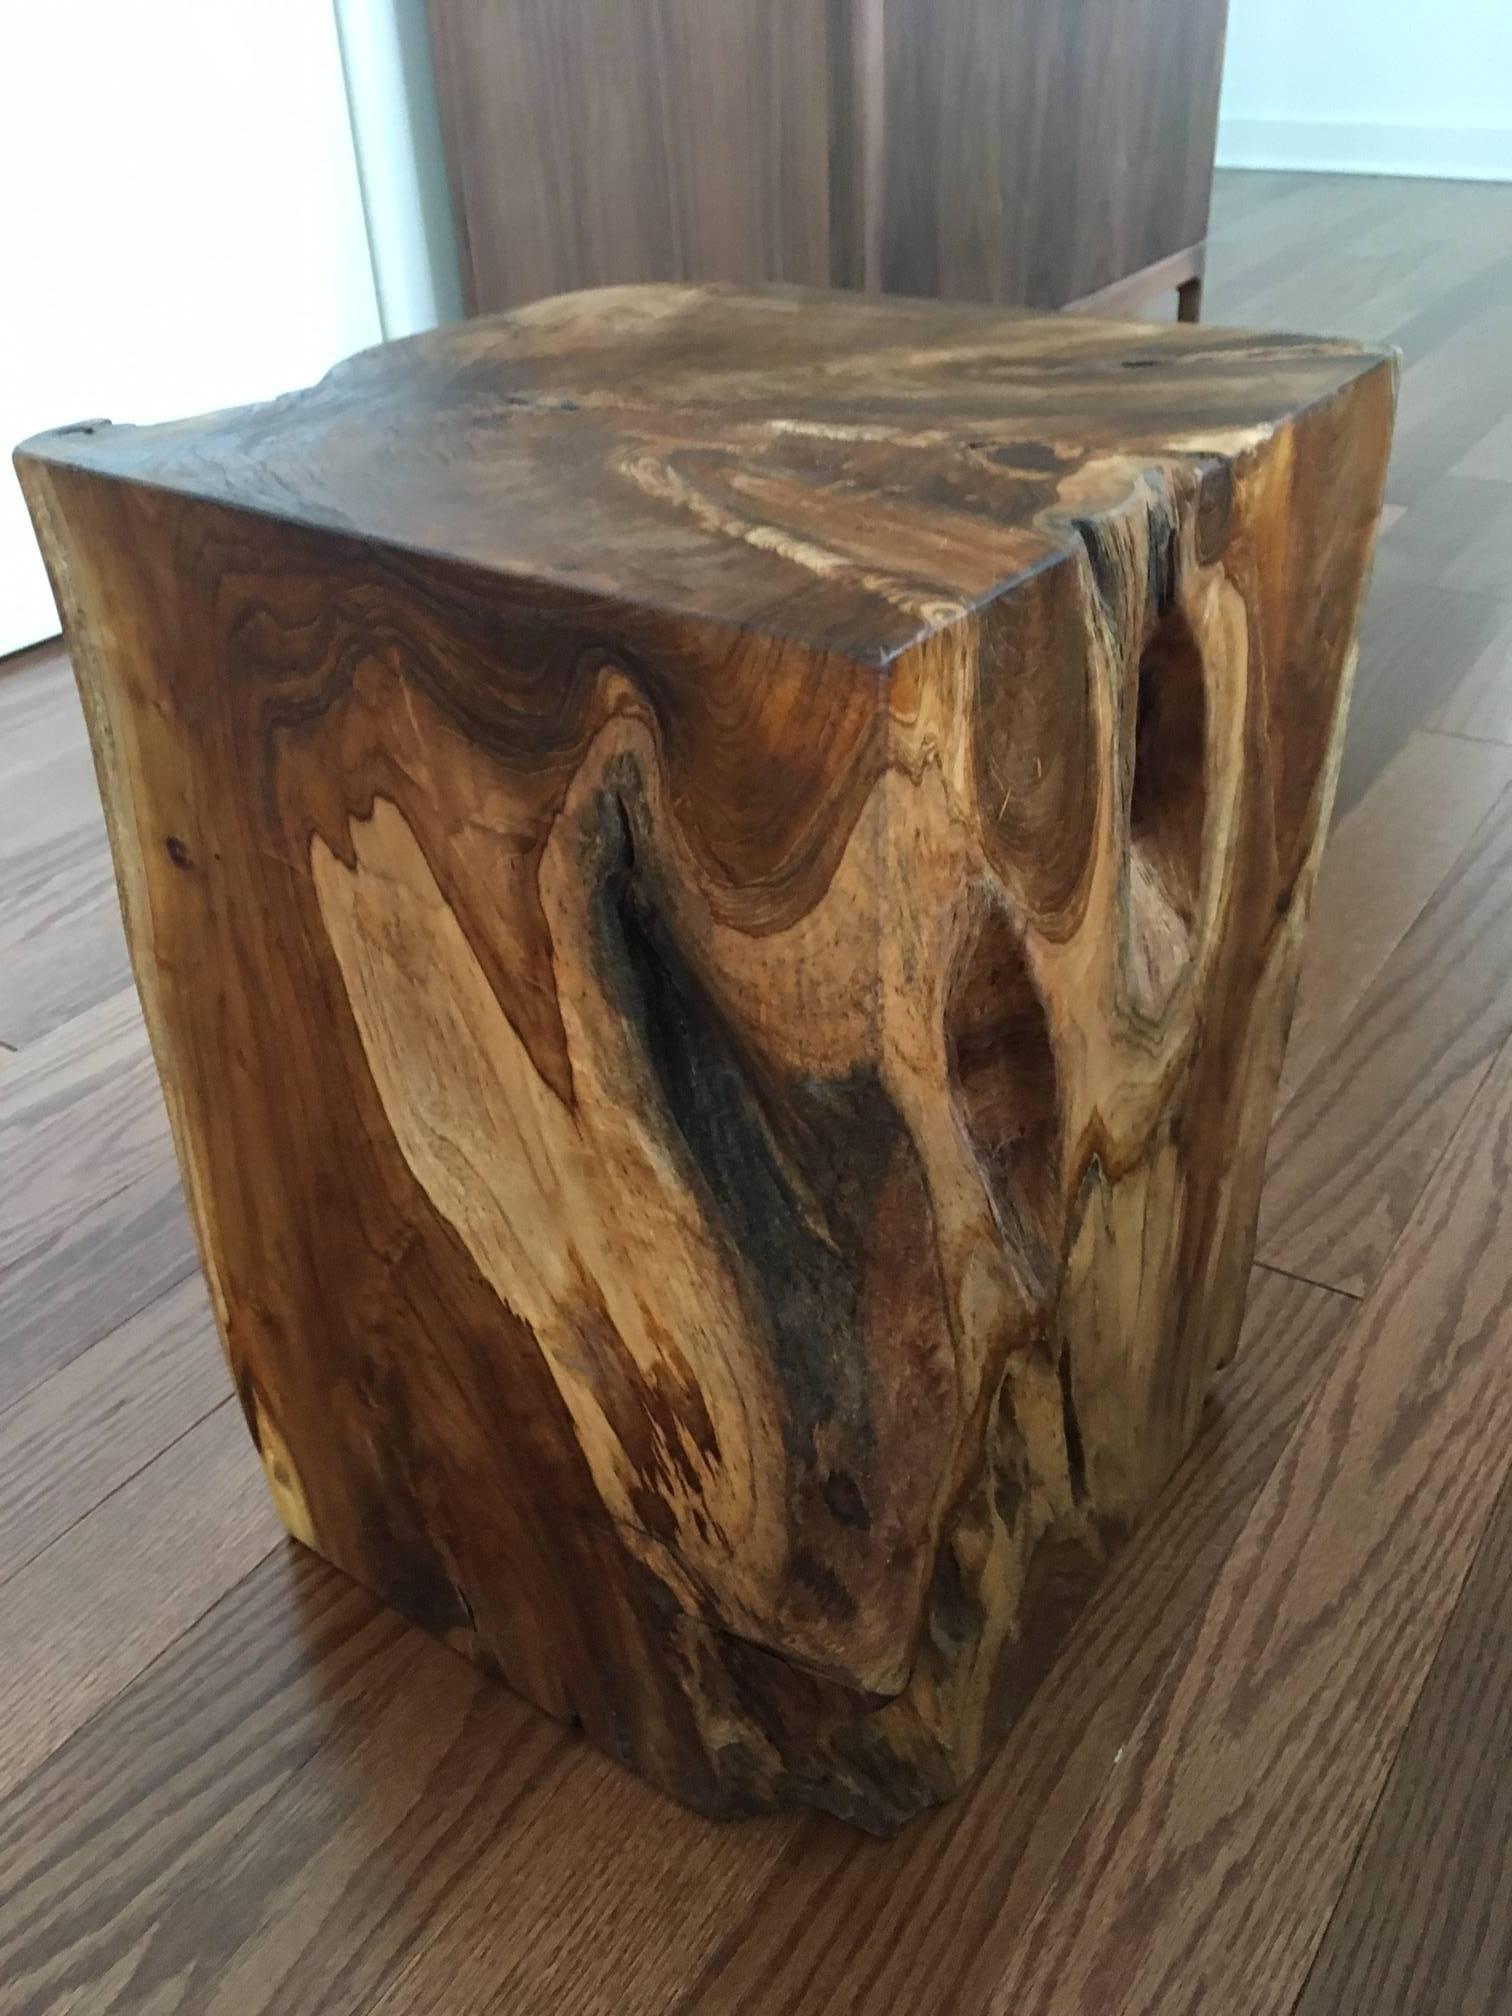 Organic modern cube side table or drink table made of reclaimed teak root wood from Indonesia. Gorgeous natural wood coloration and wood variations on all four sides.